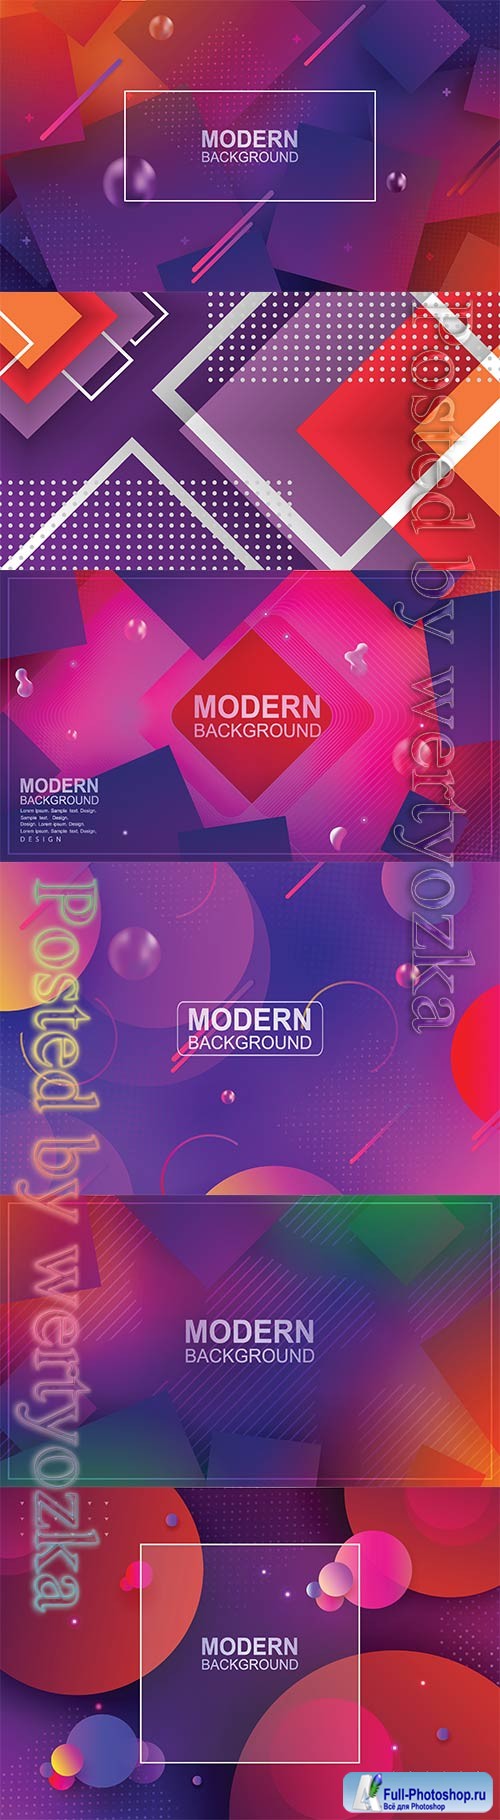 Abstract luxury vector backgrounds with different shapes # 5